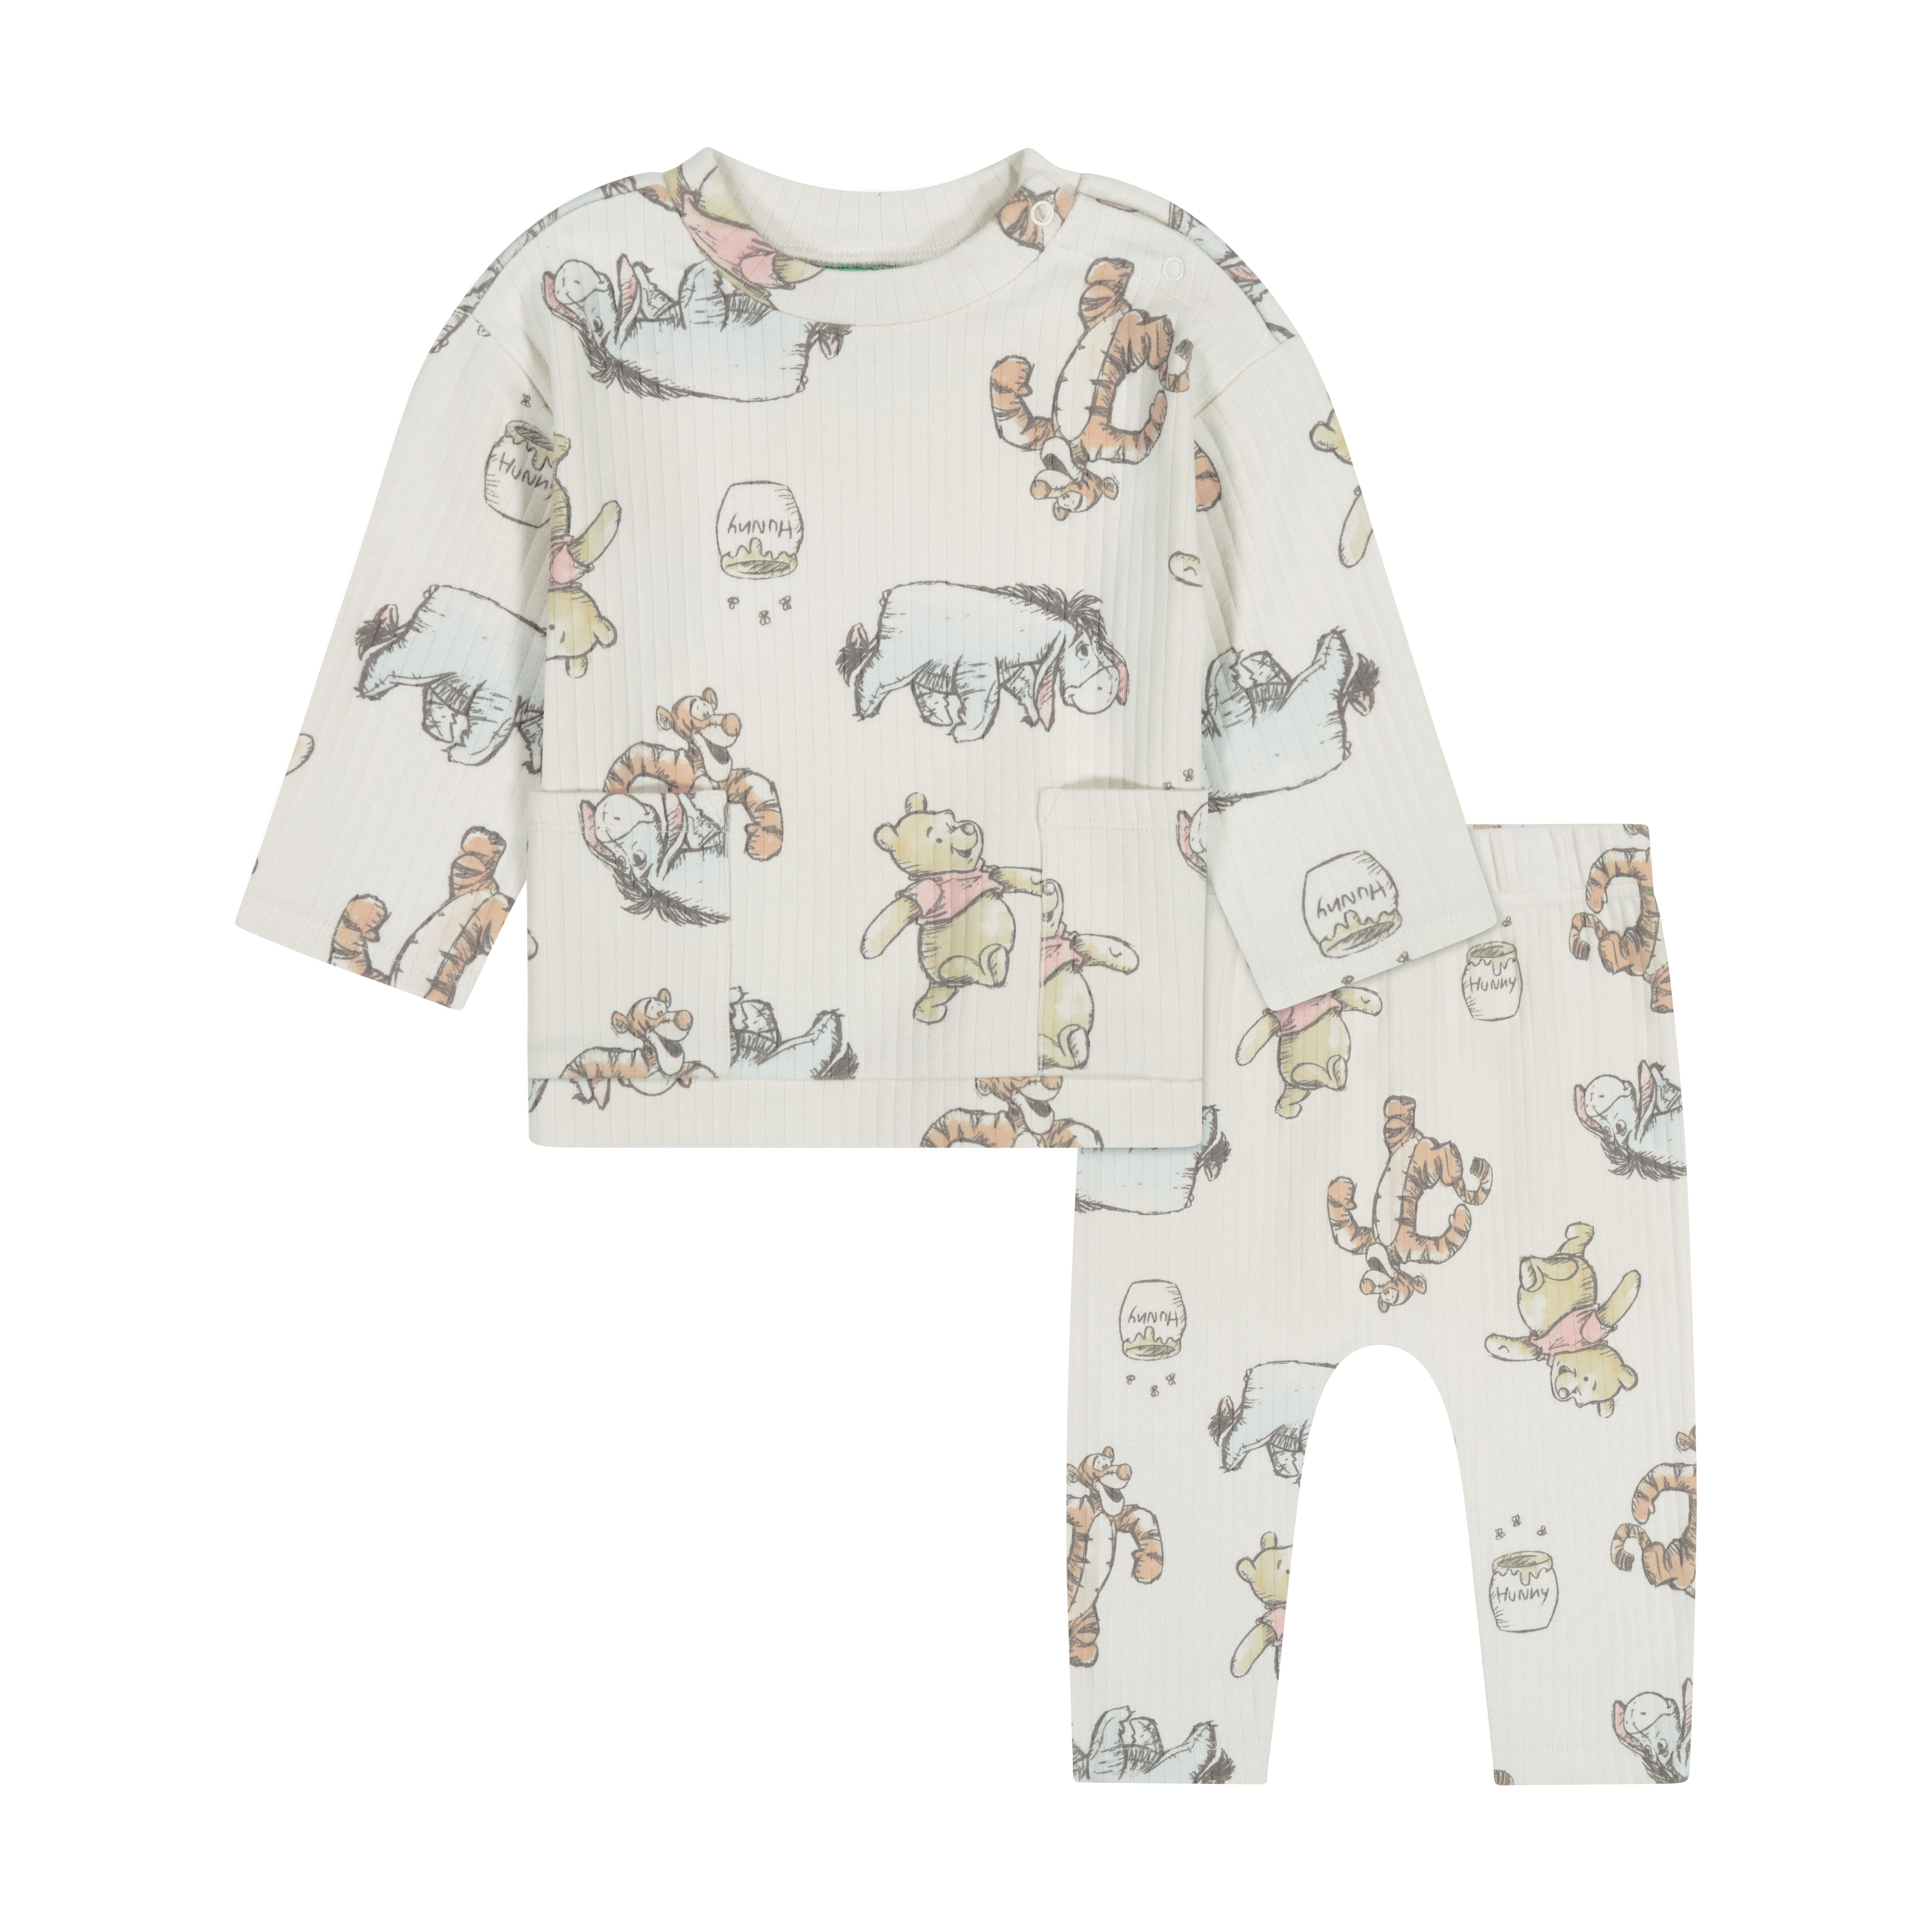 Winnie the Pooh Baby Boy 2 Piece Pant Set, Sizes 0/3 Months-24 Months - image 3 of 8